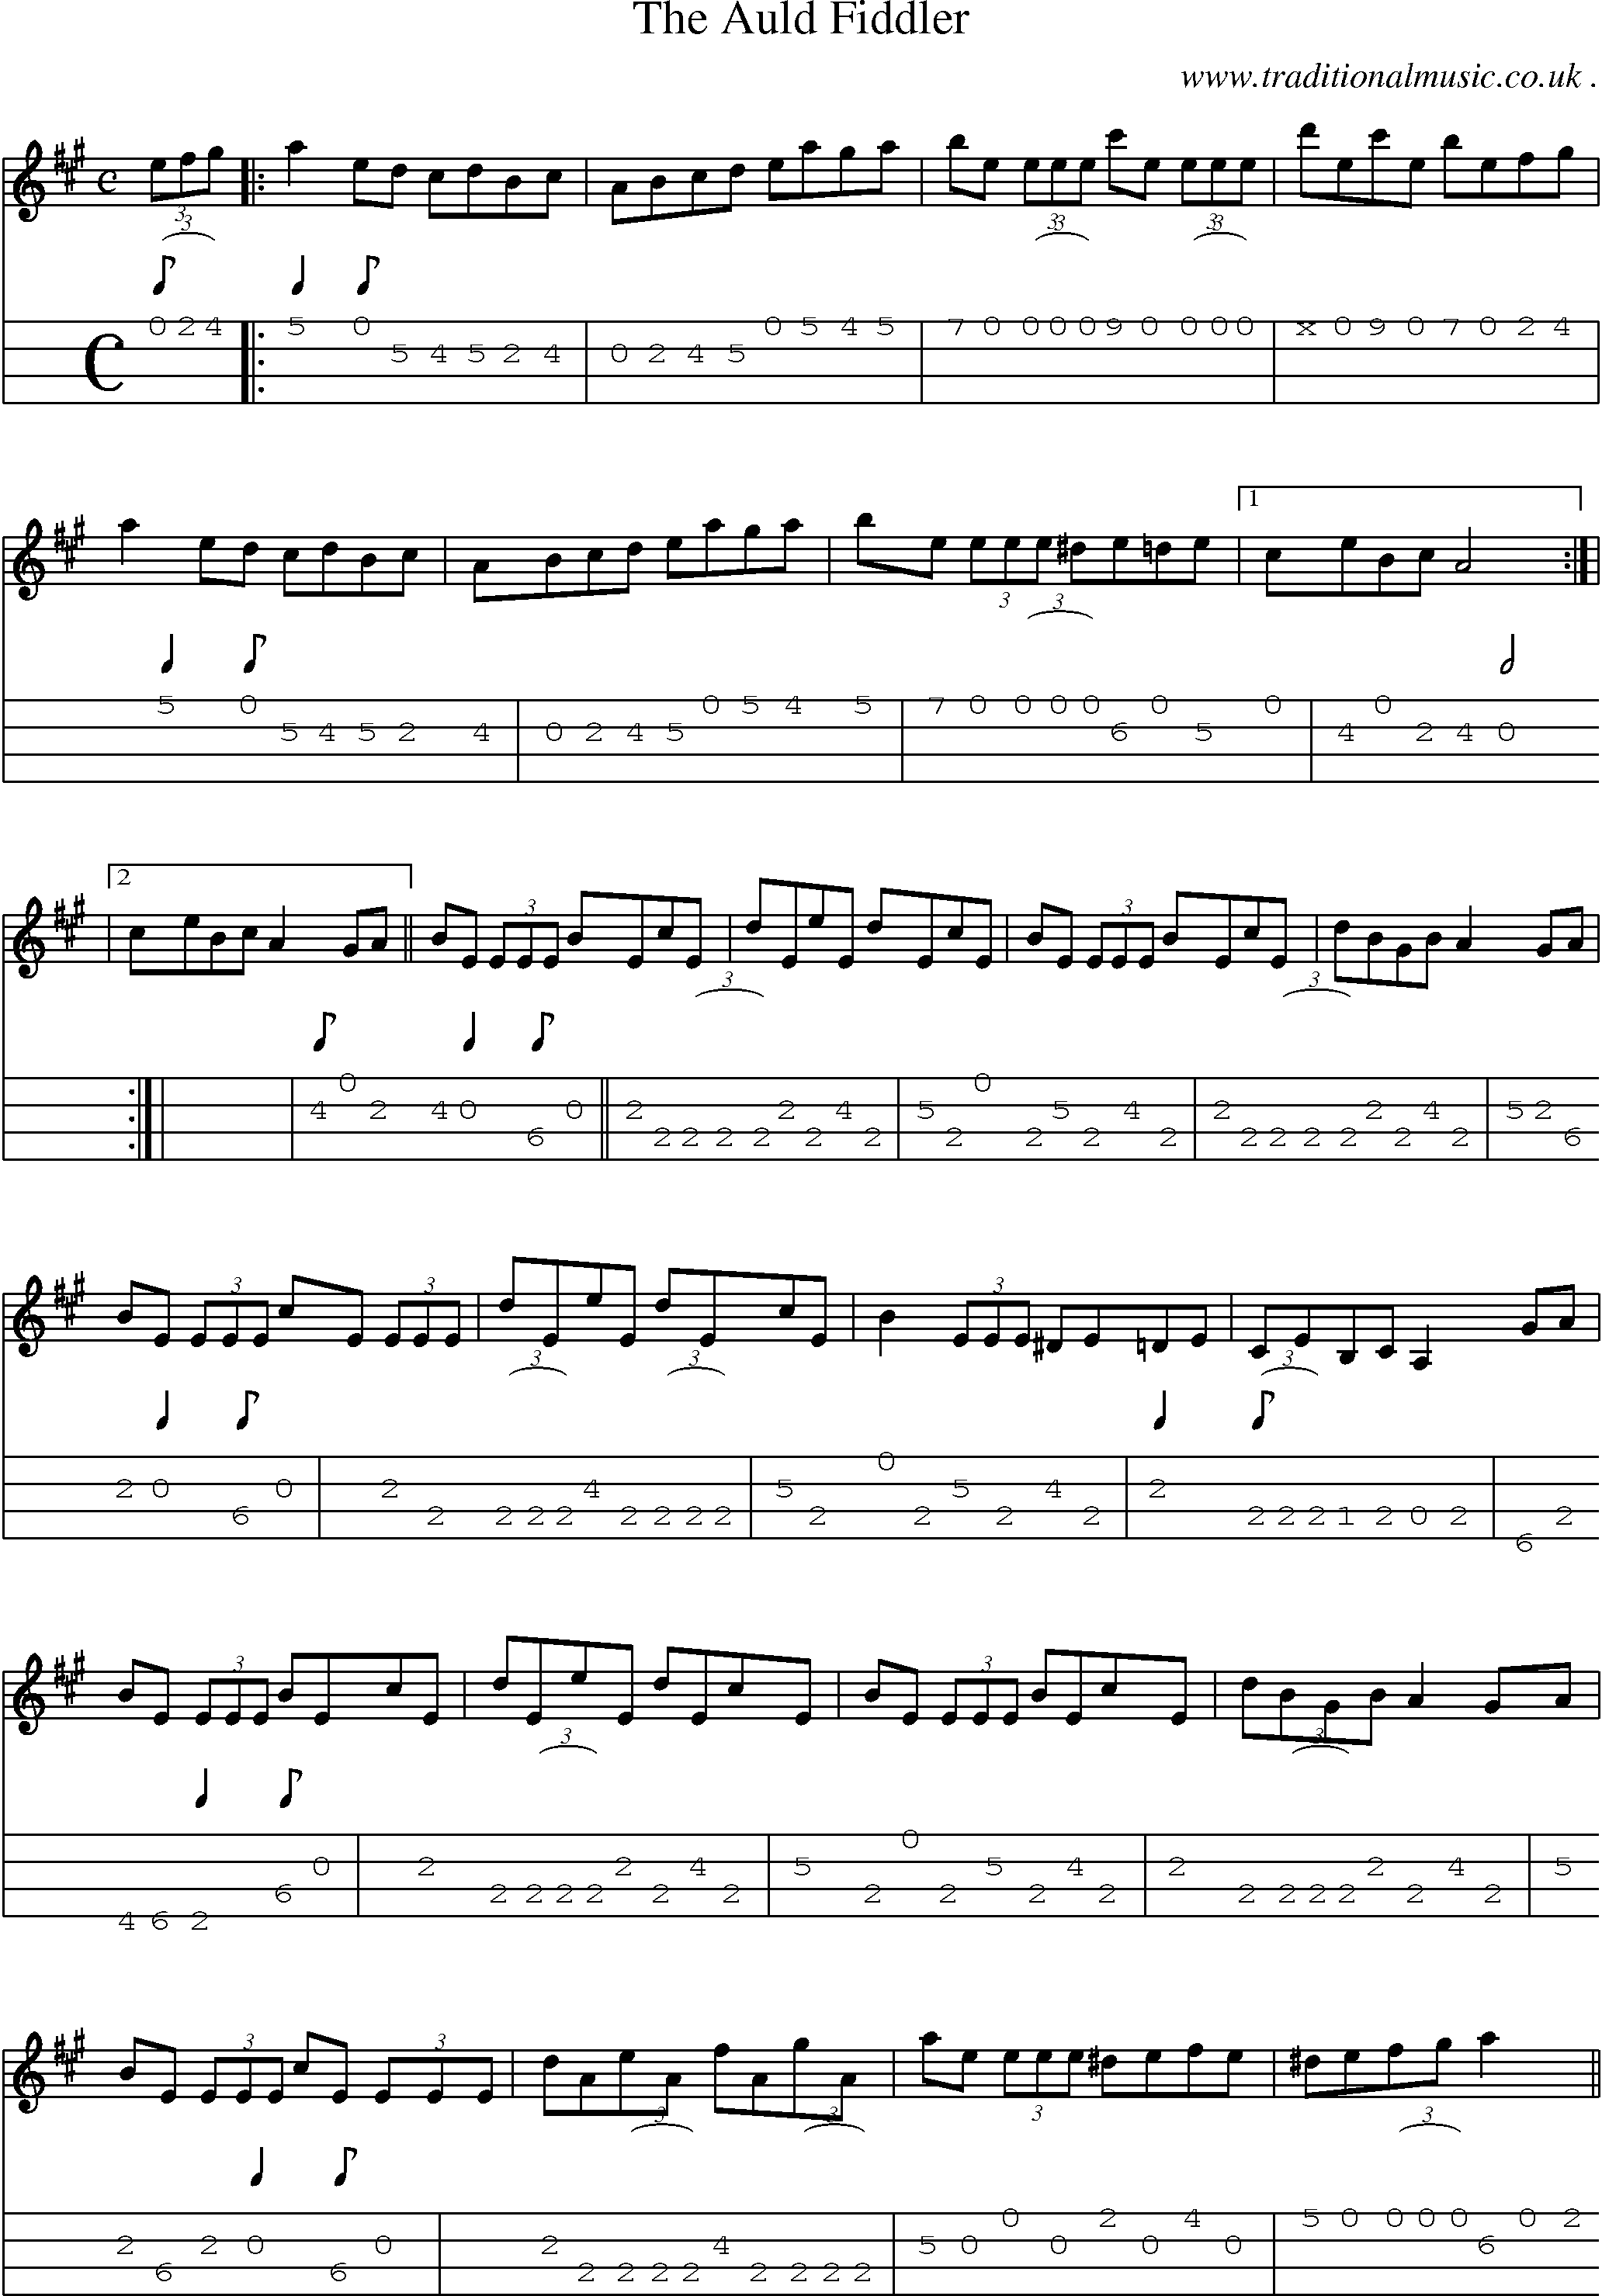 Sheet-music  score, Chords and Mandolin Tabs for The Auld Fiddler